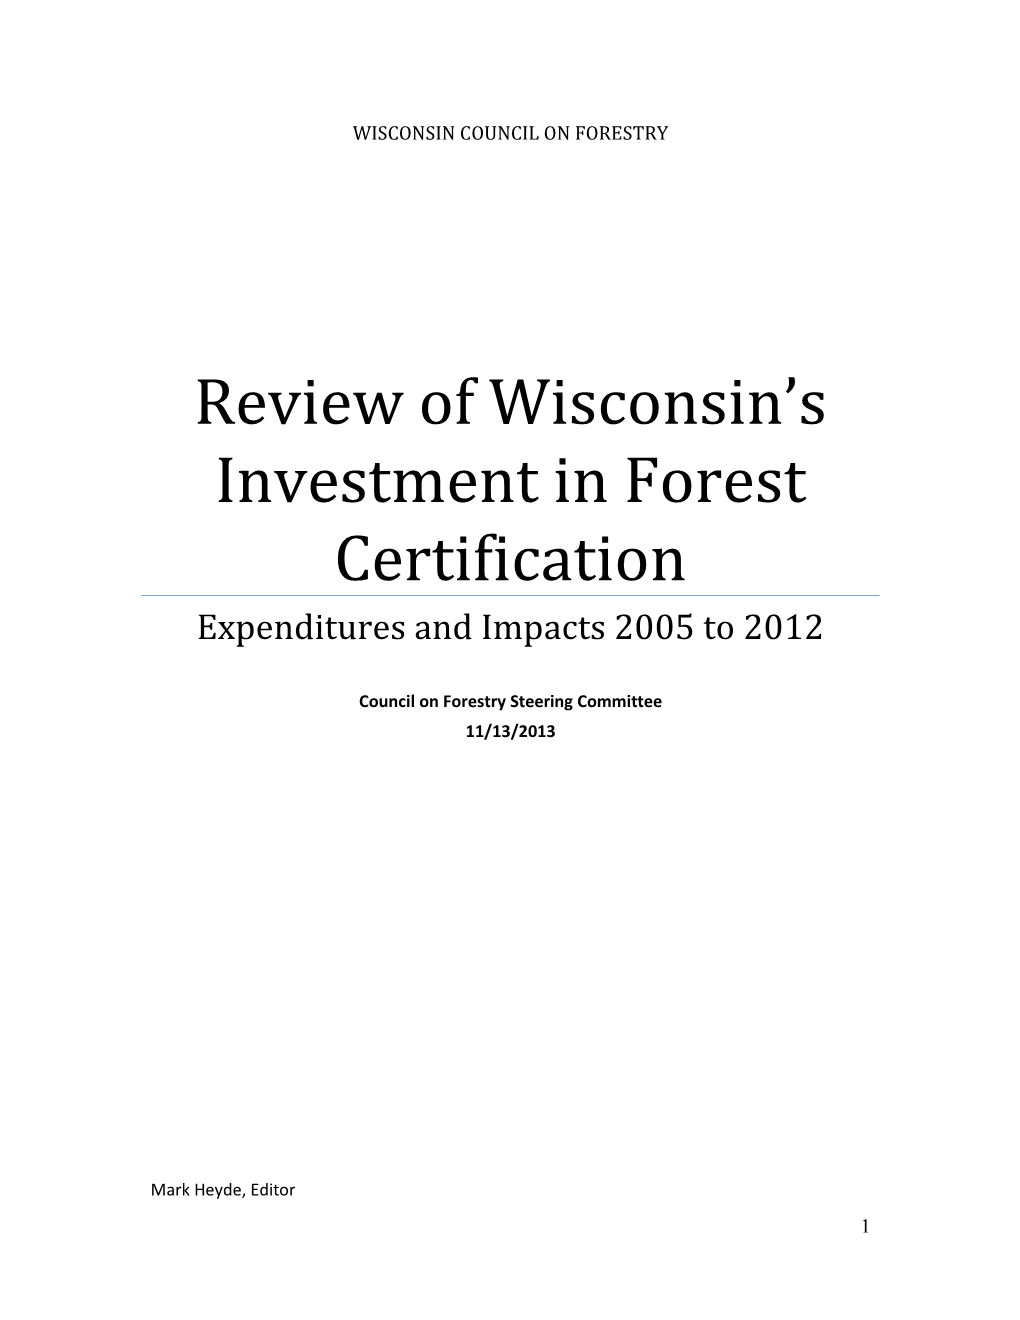 Review of Wisconsin's Investment in Forest Certification